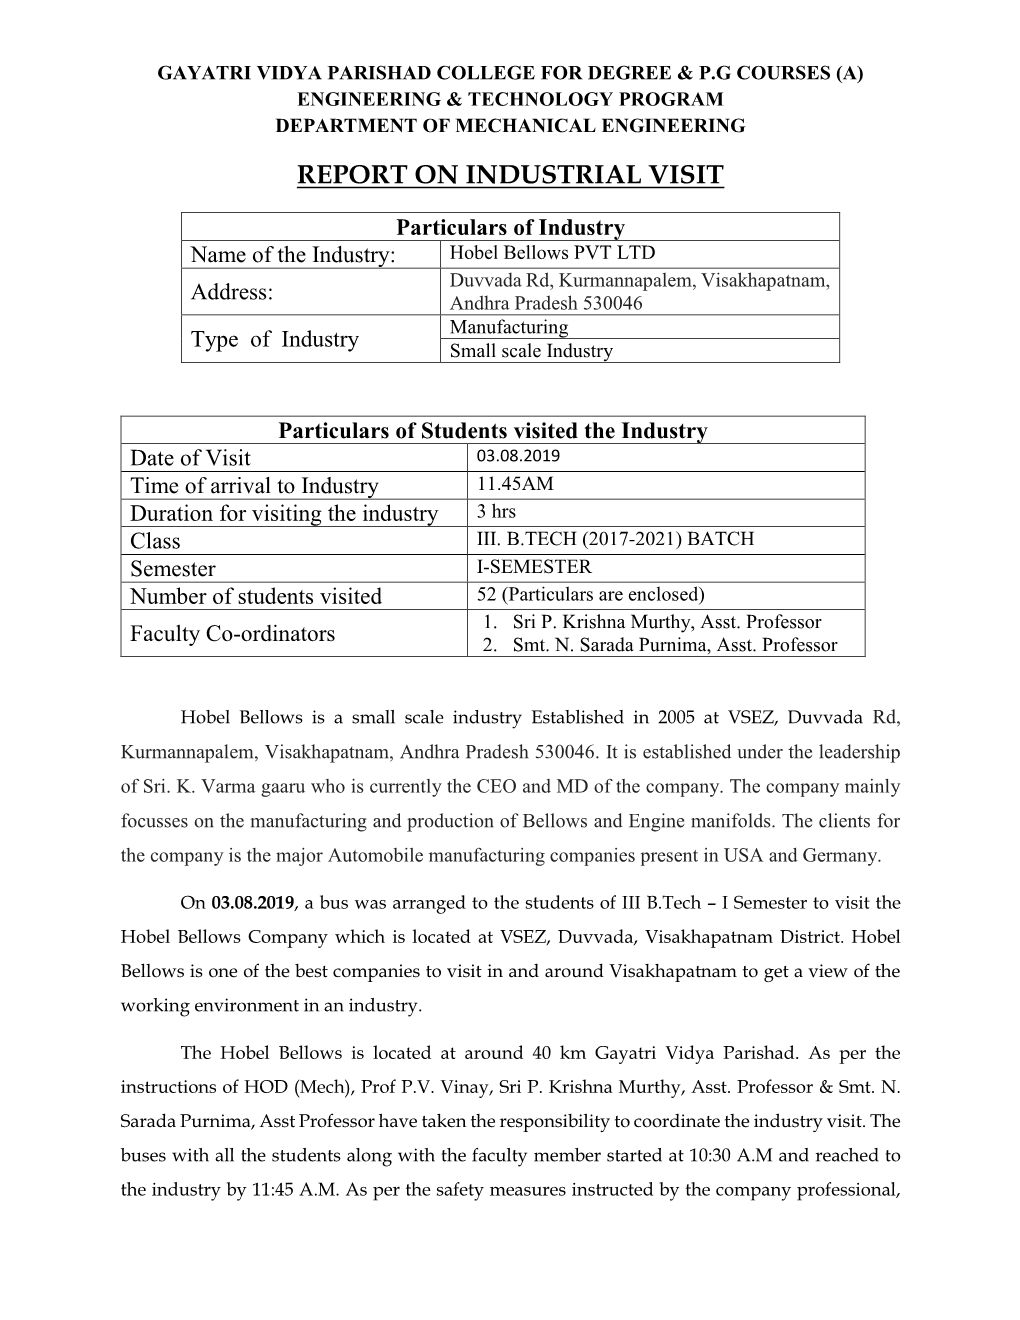 Report on Industrial Visit